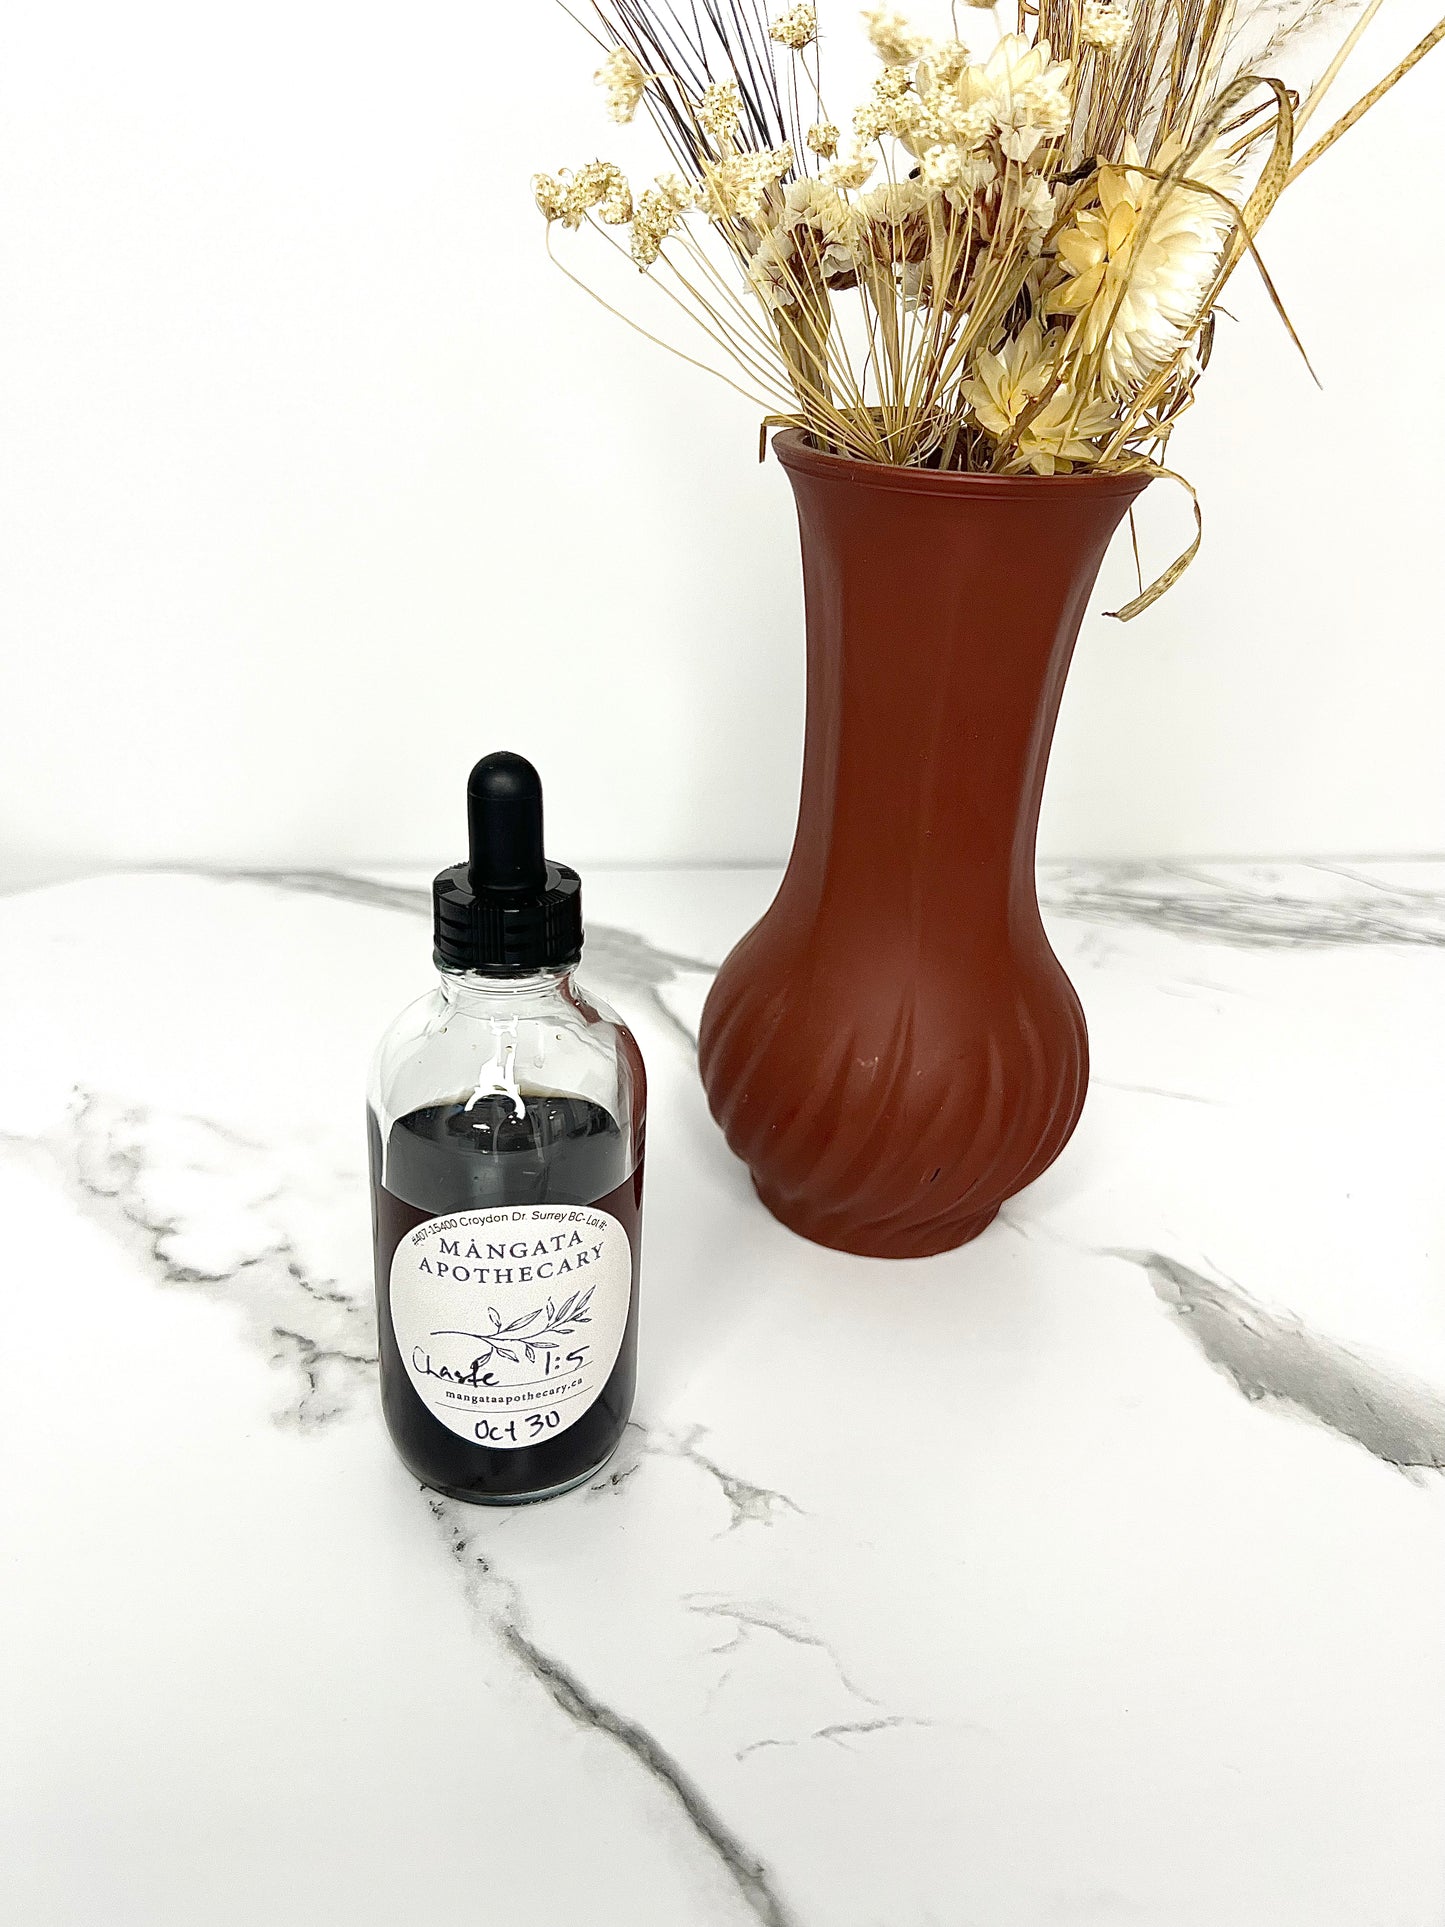 Chaste Berry Tincture - Product Image For Mangata Dispensary